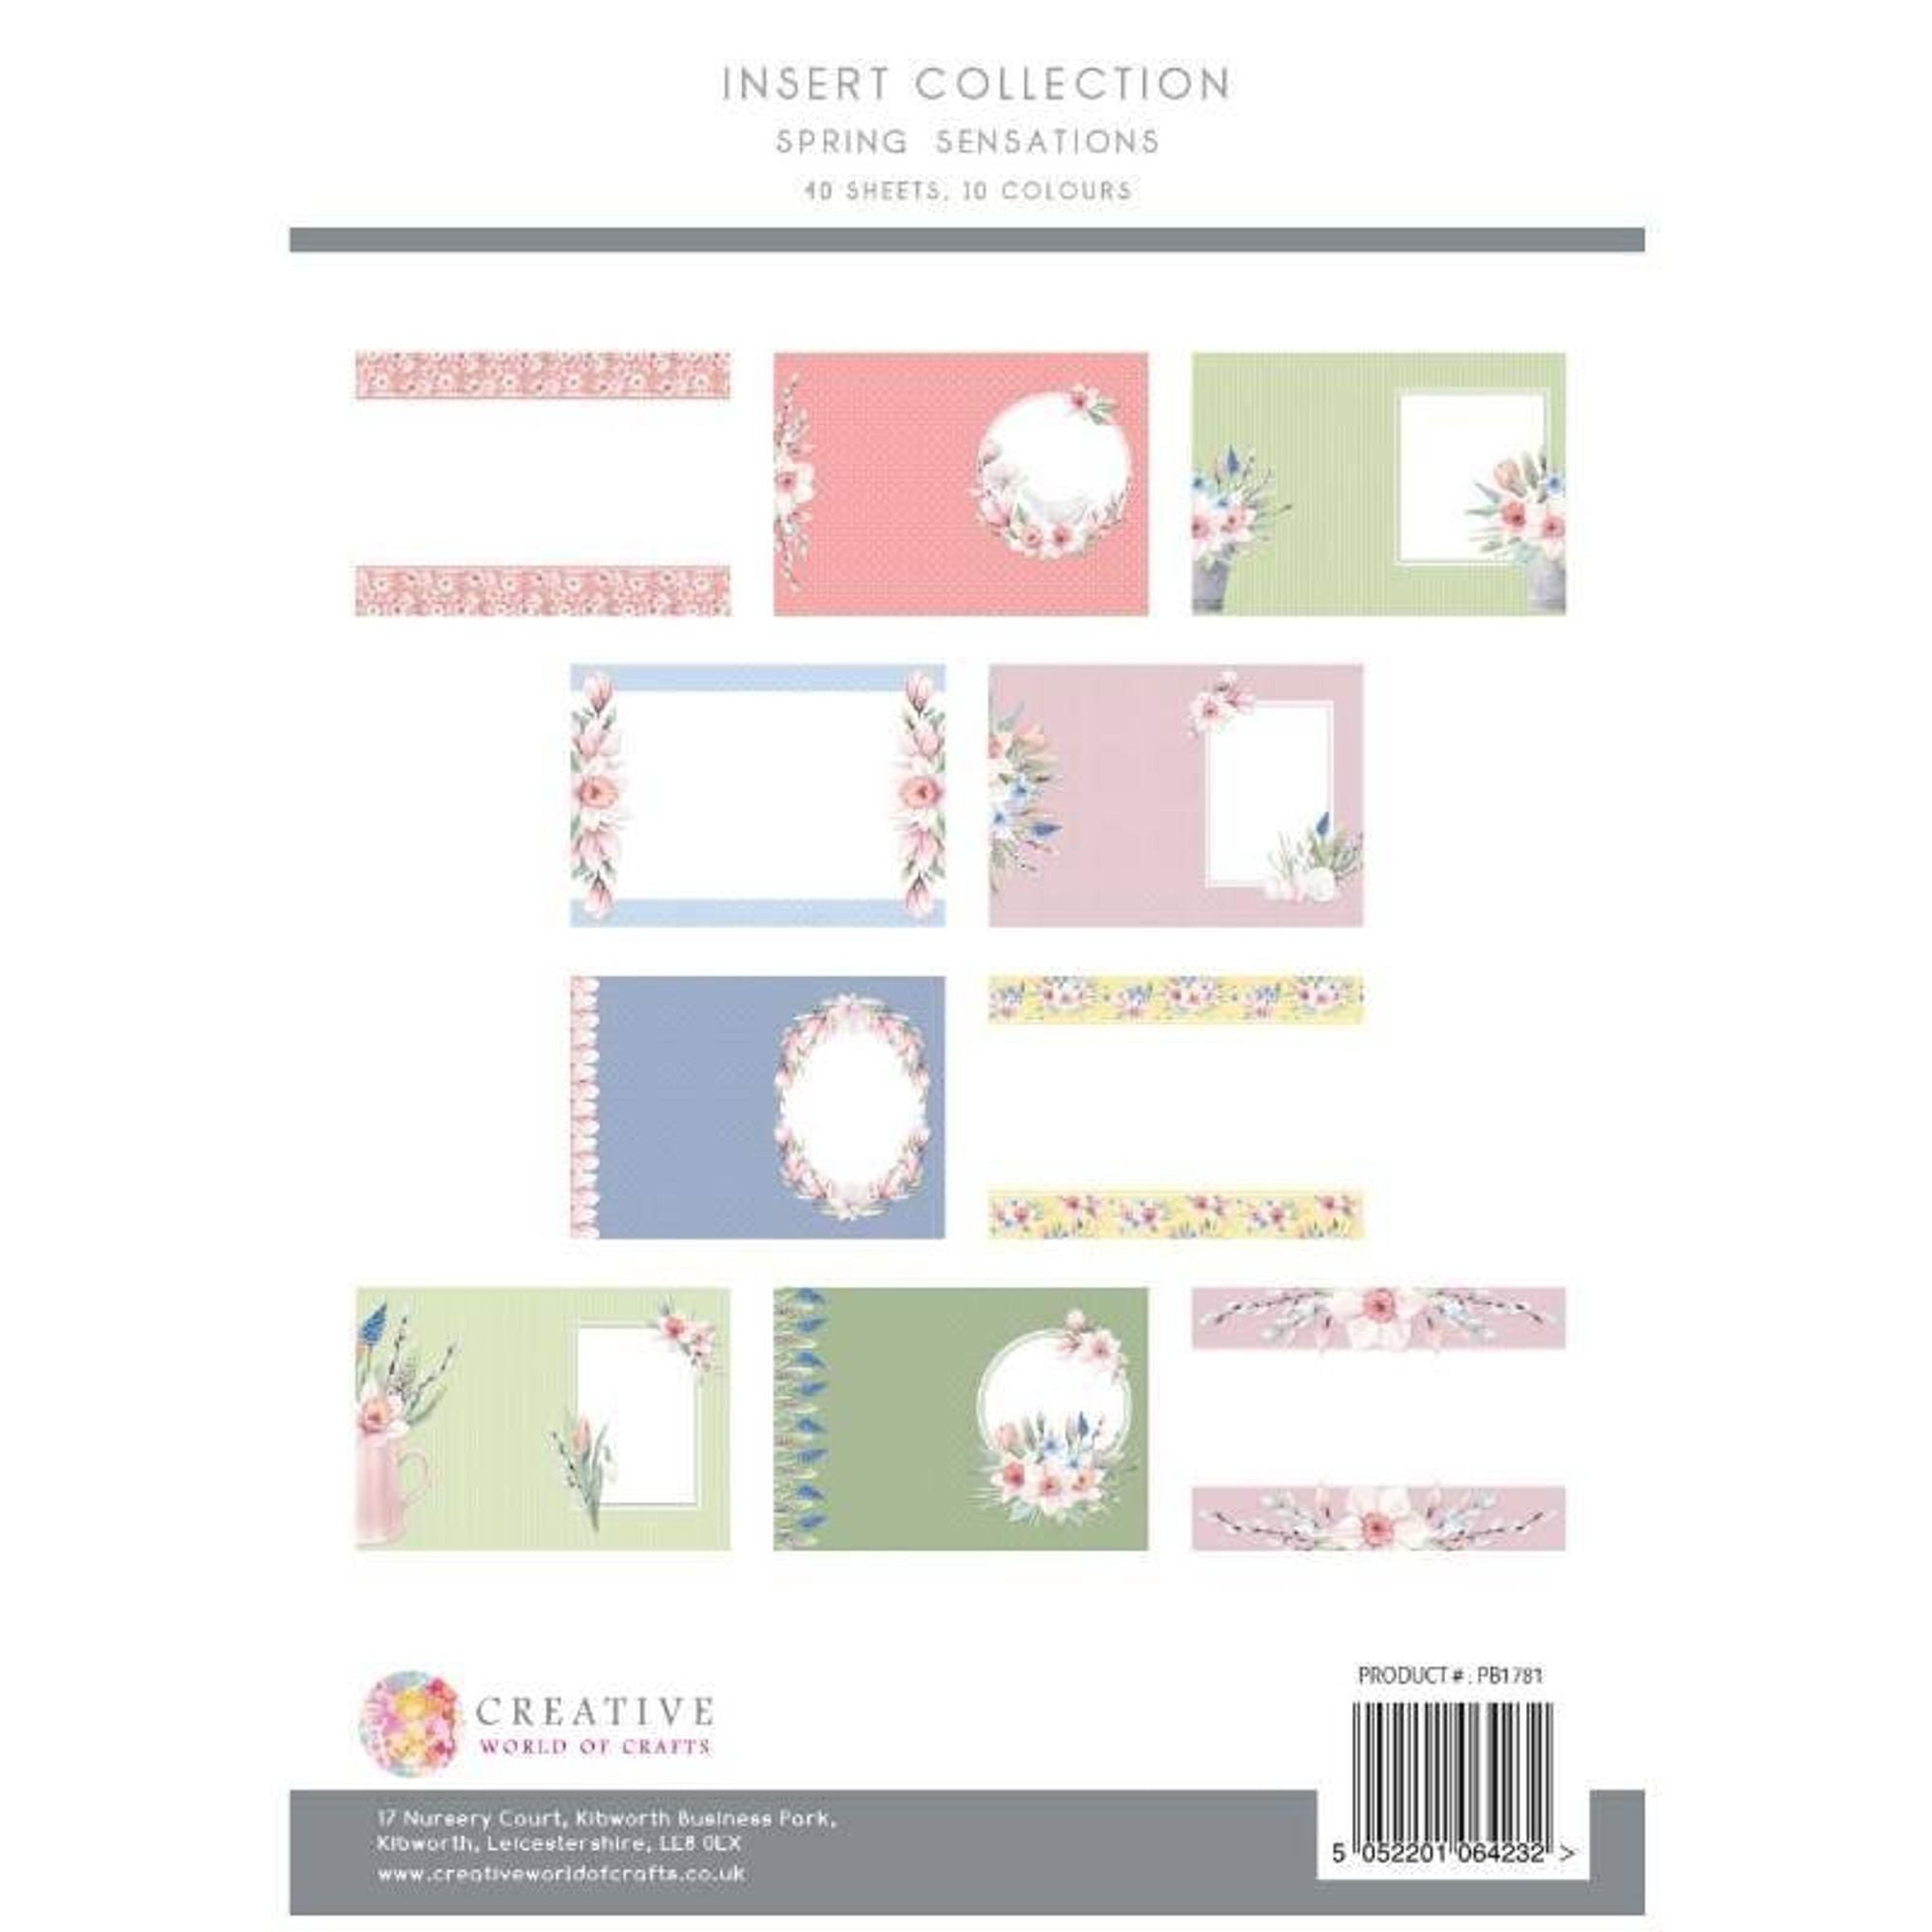 The Paper Boutique Spring Sensation Insert Collection